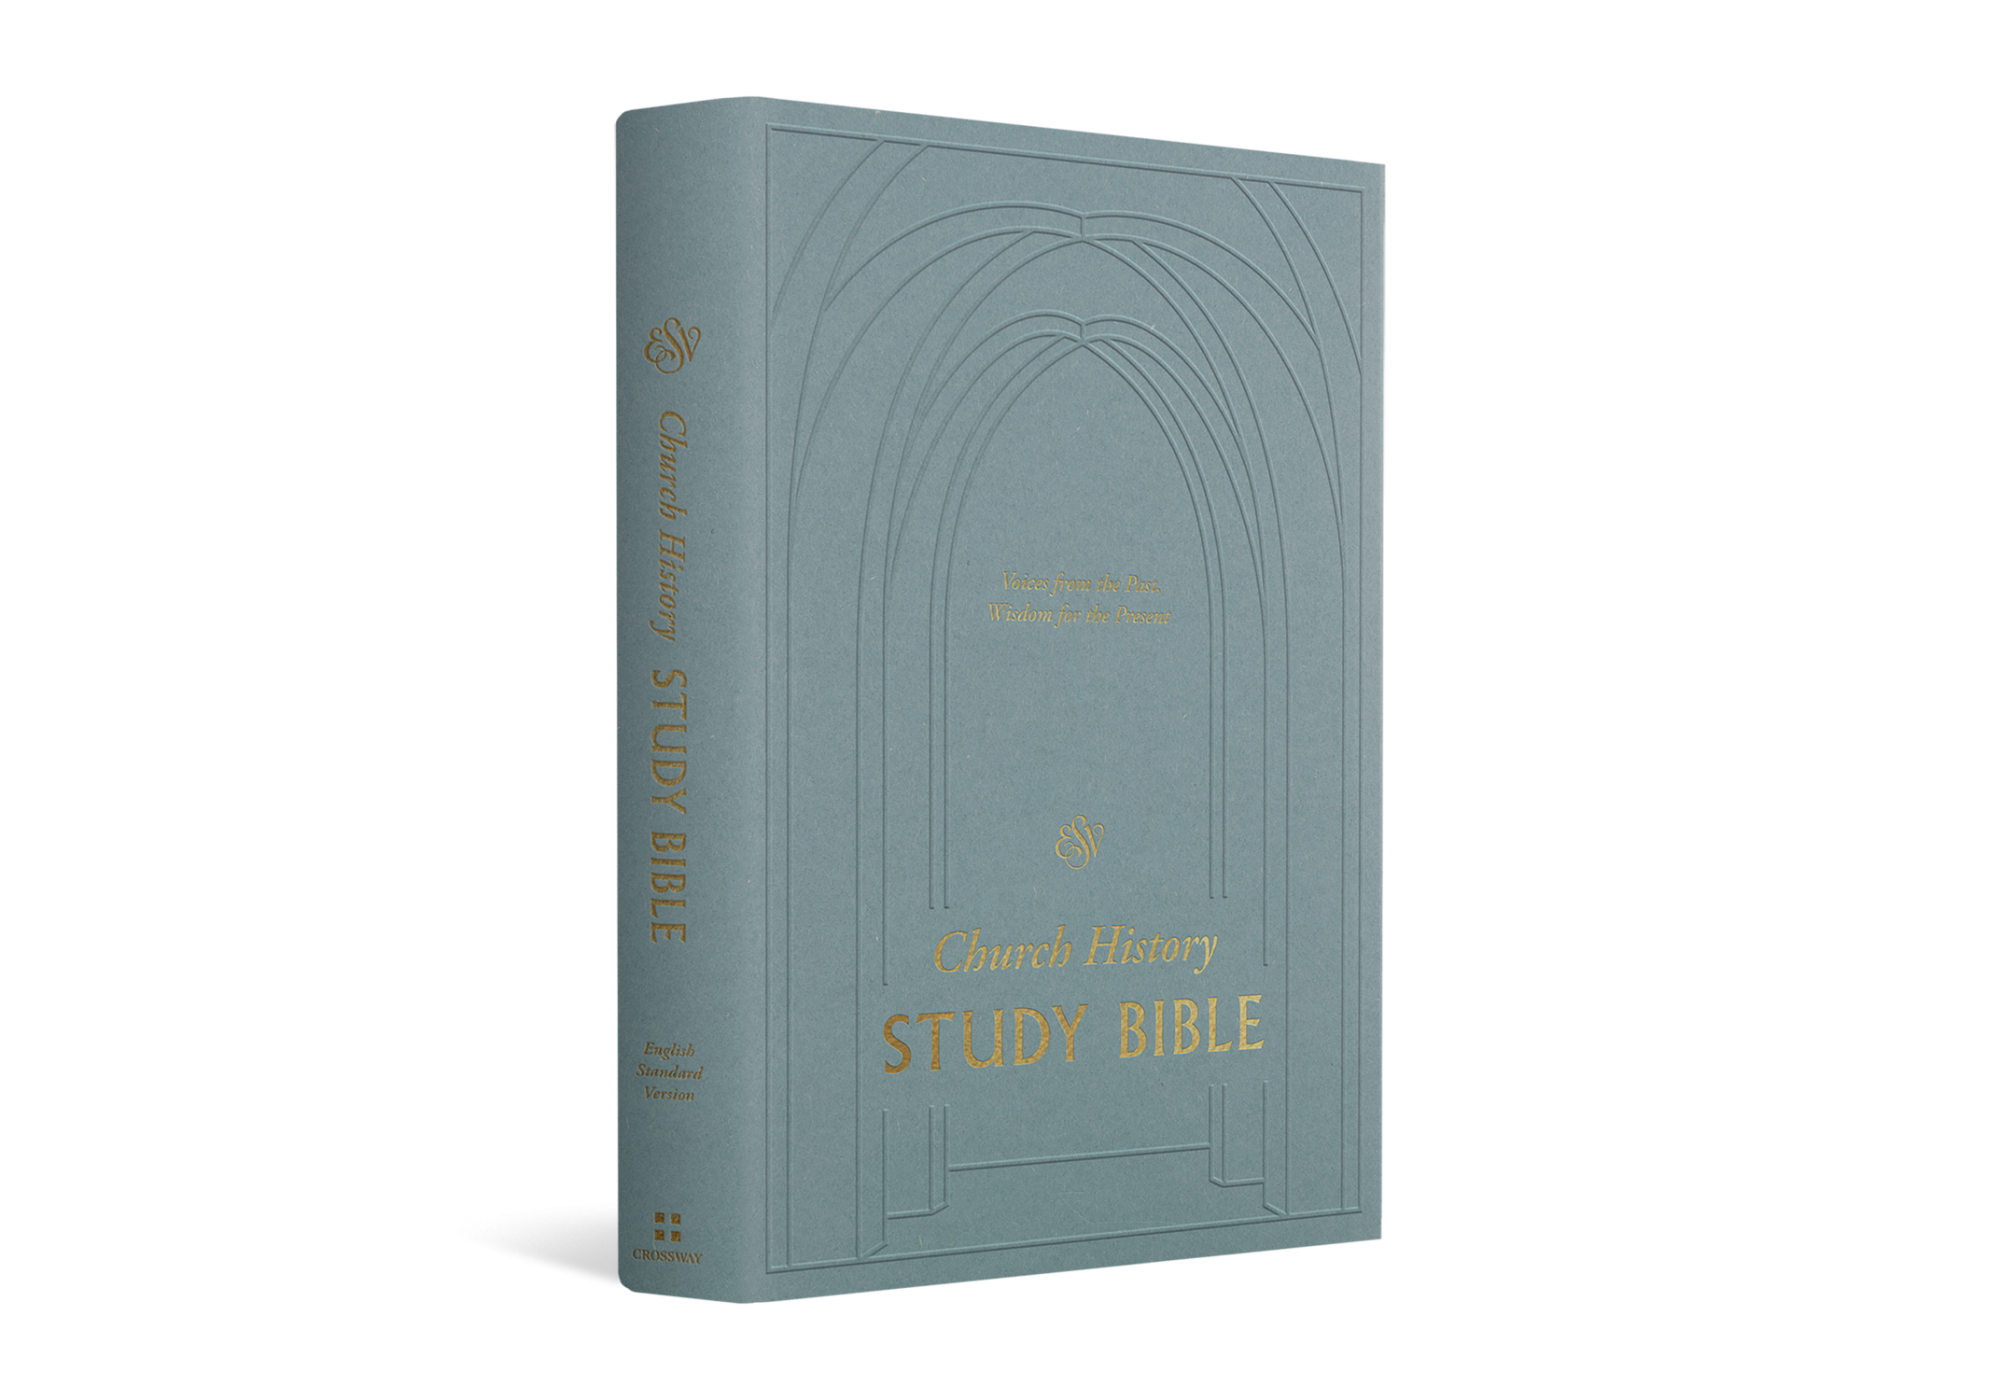 ESV Church History Study Bible: Voices from the Past, Wisdom for the Present